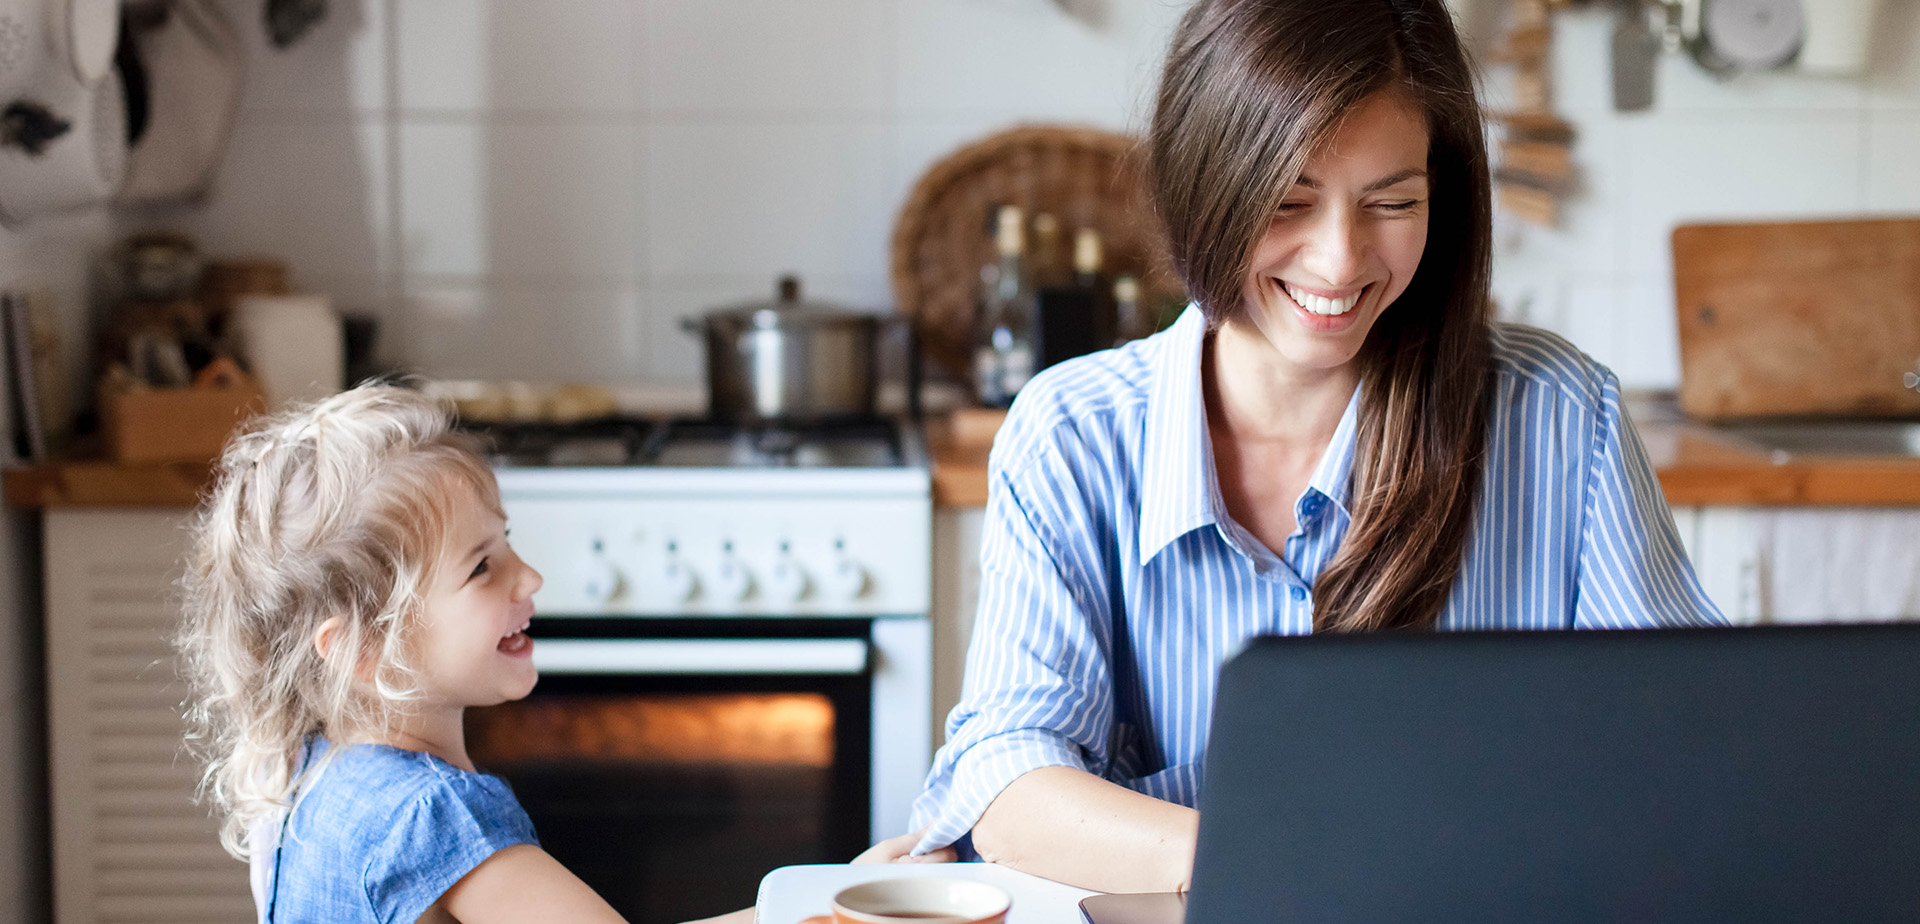 Working mom works from home office. Happy mother and daughter smiling. Successful woman and cute child using laptop. Freelancer workplace in cozy kitchen. Female business. Lifestyle authentic moment.